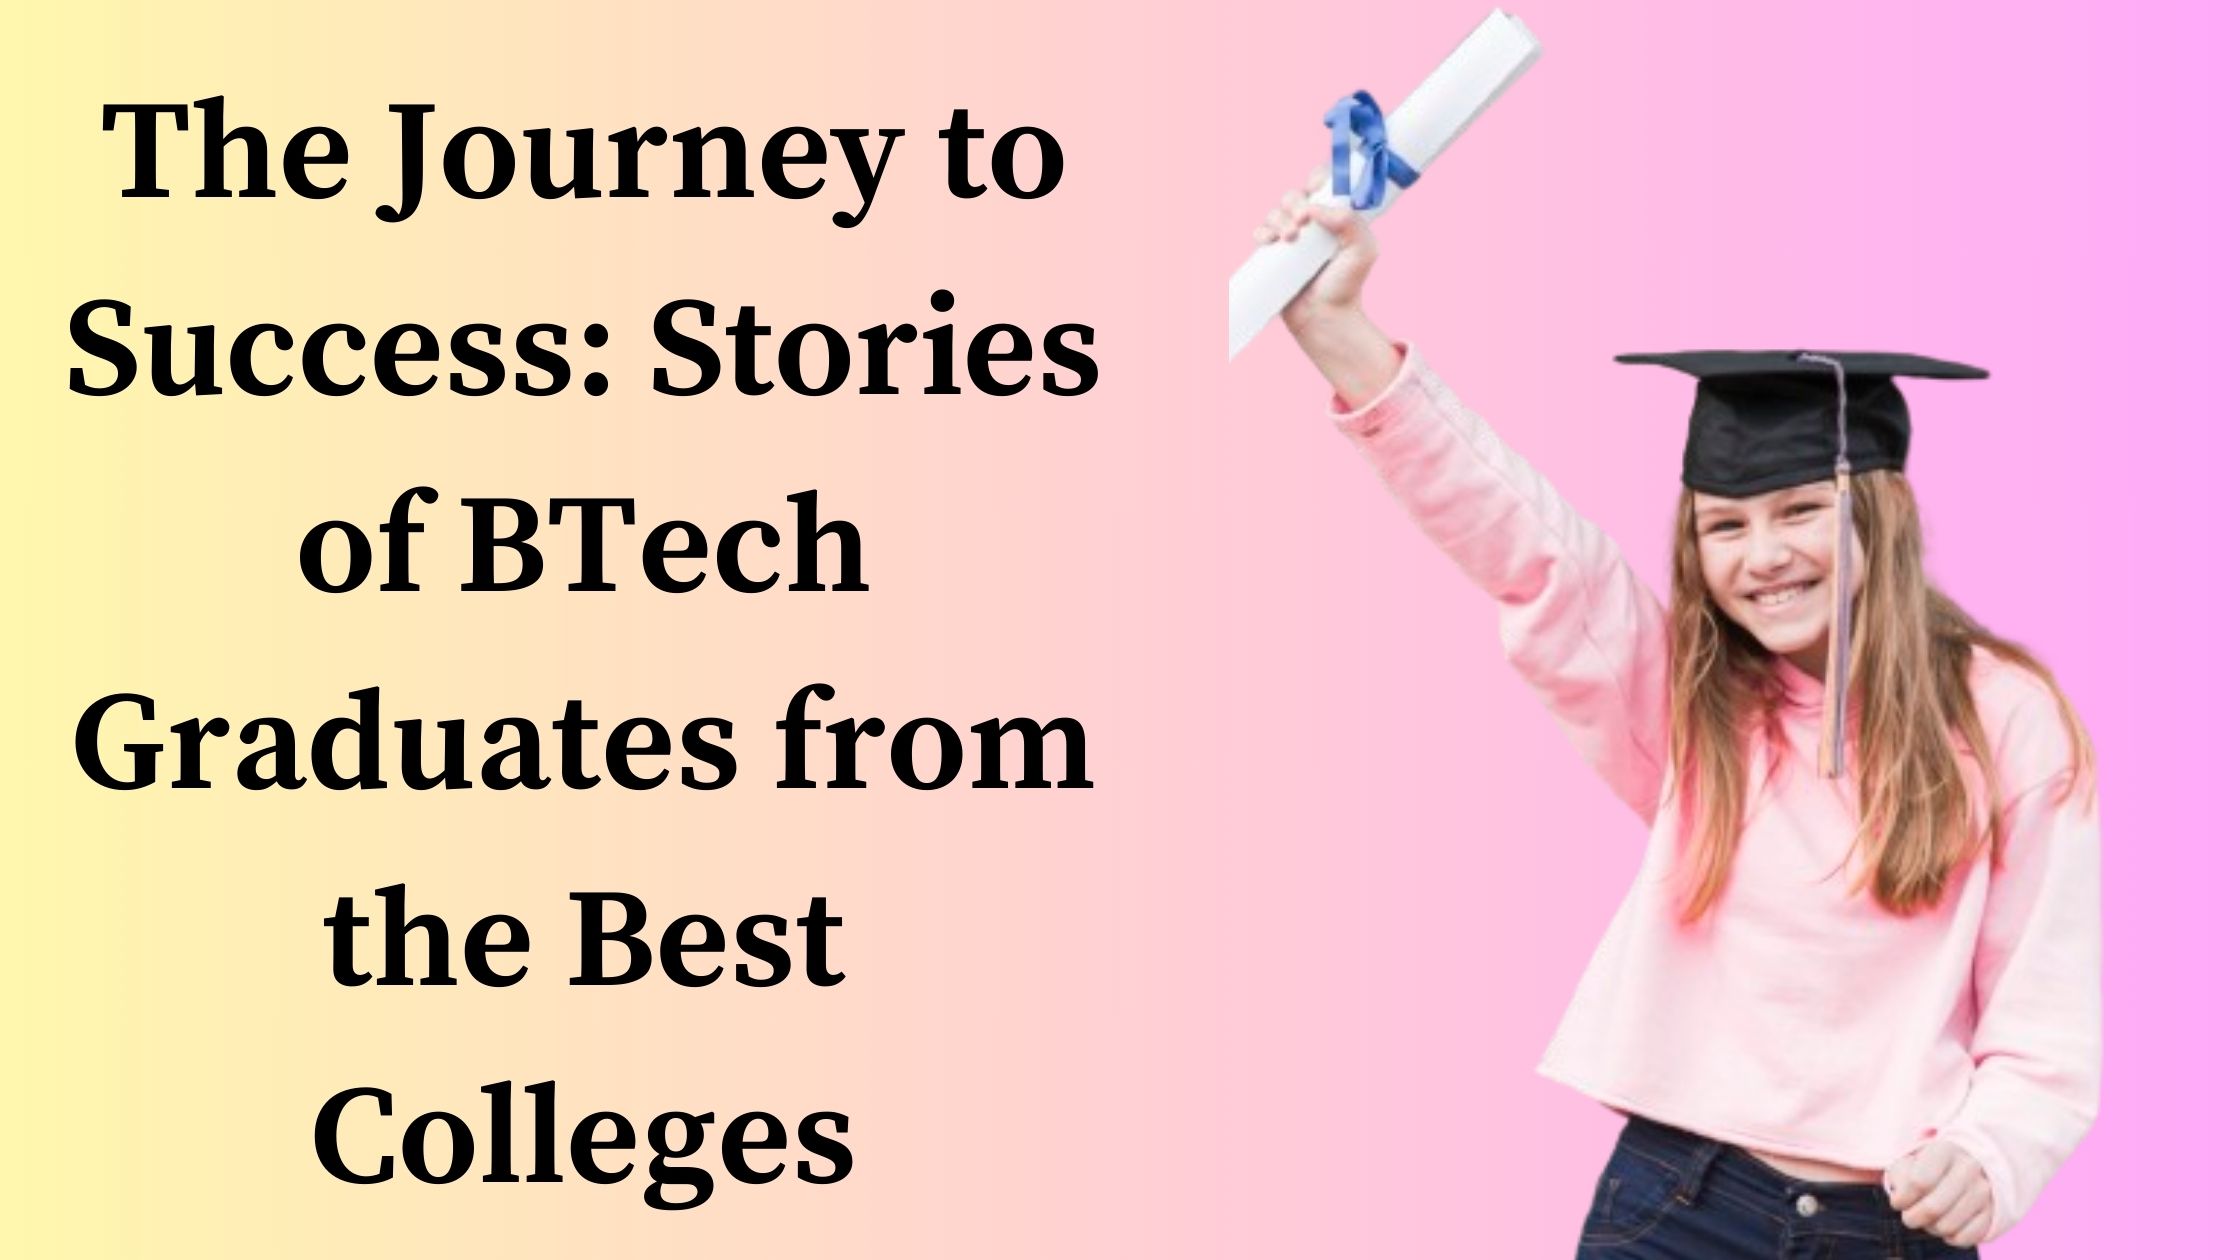 The Journey to Success: Stories of BTech Graduates from the Best Colleges